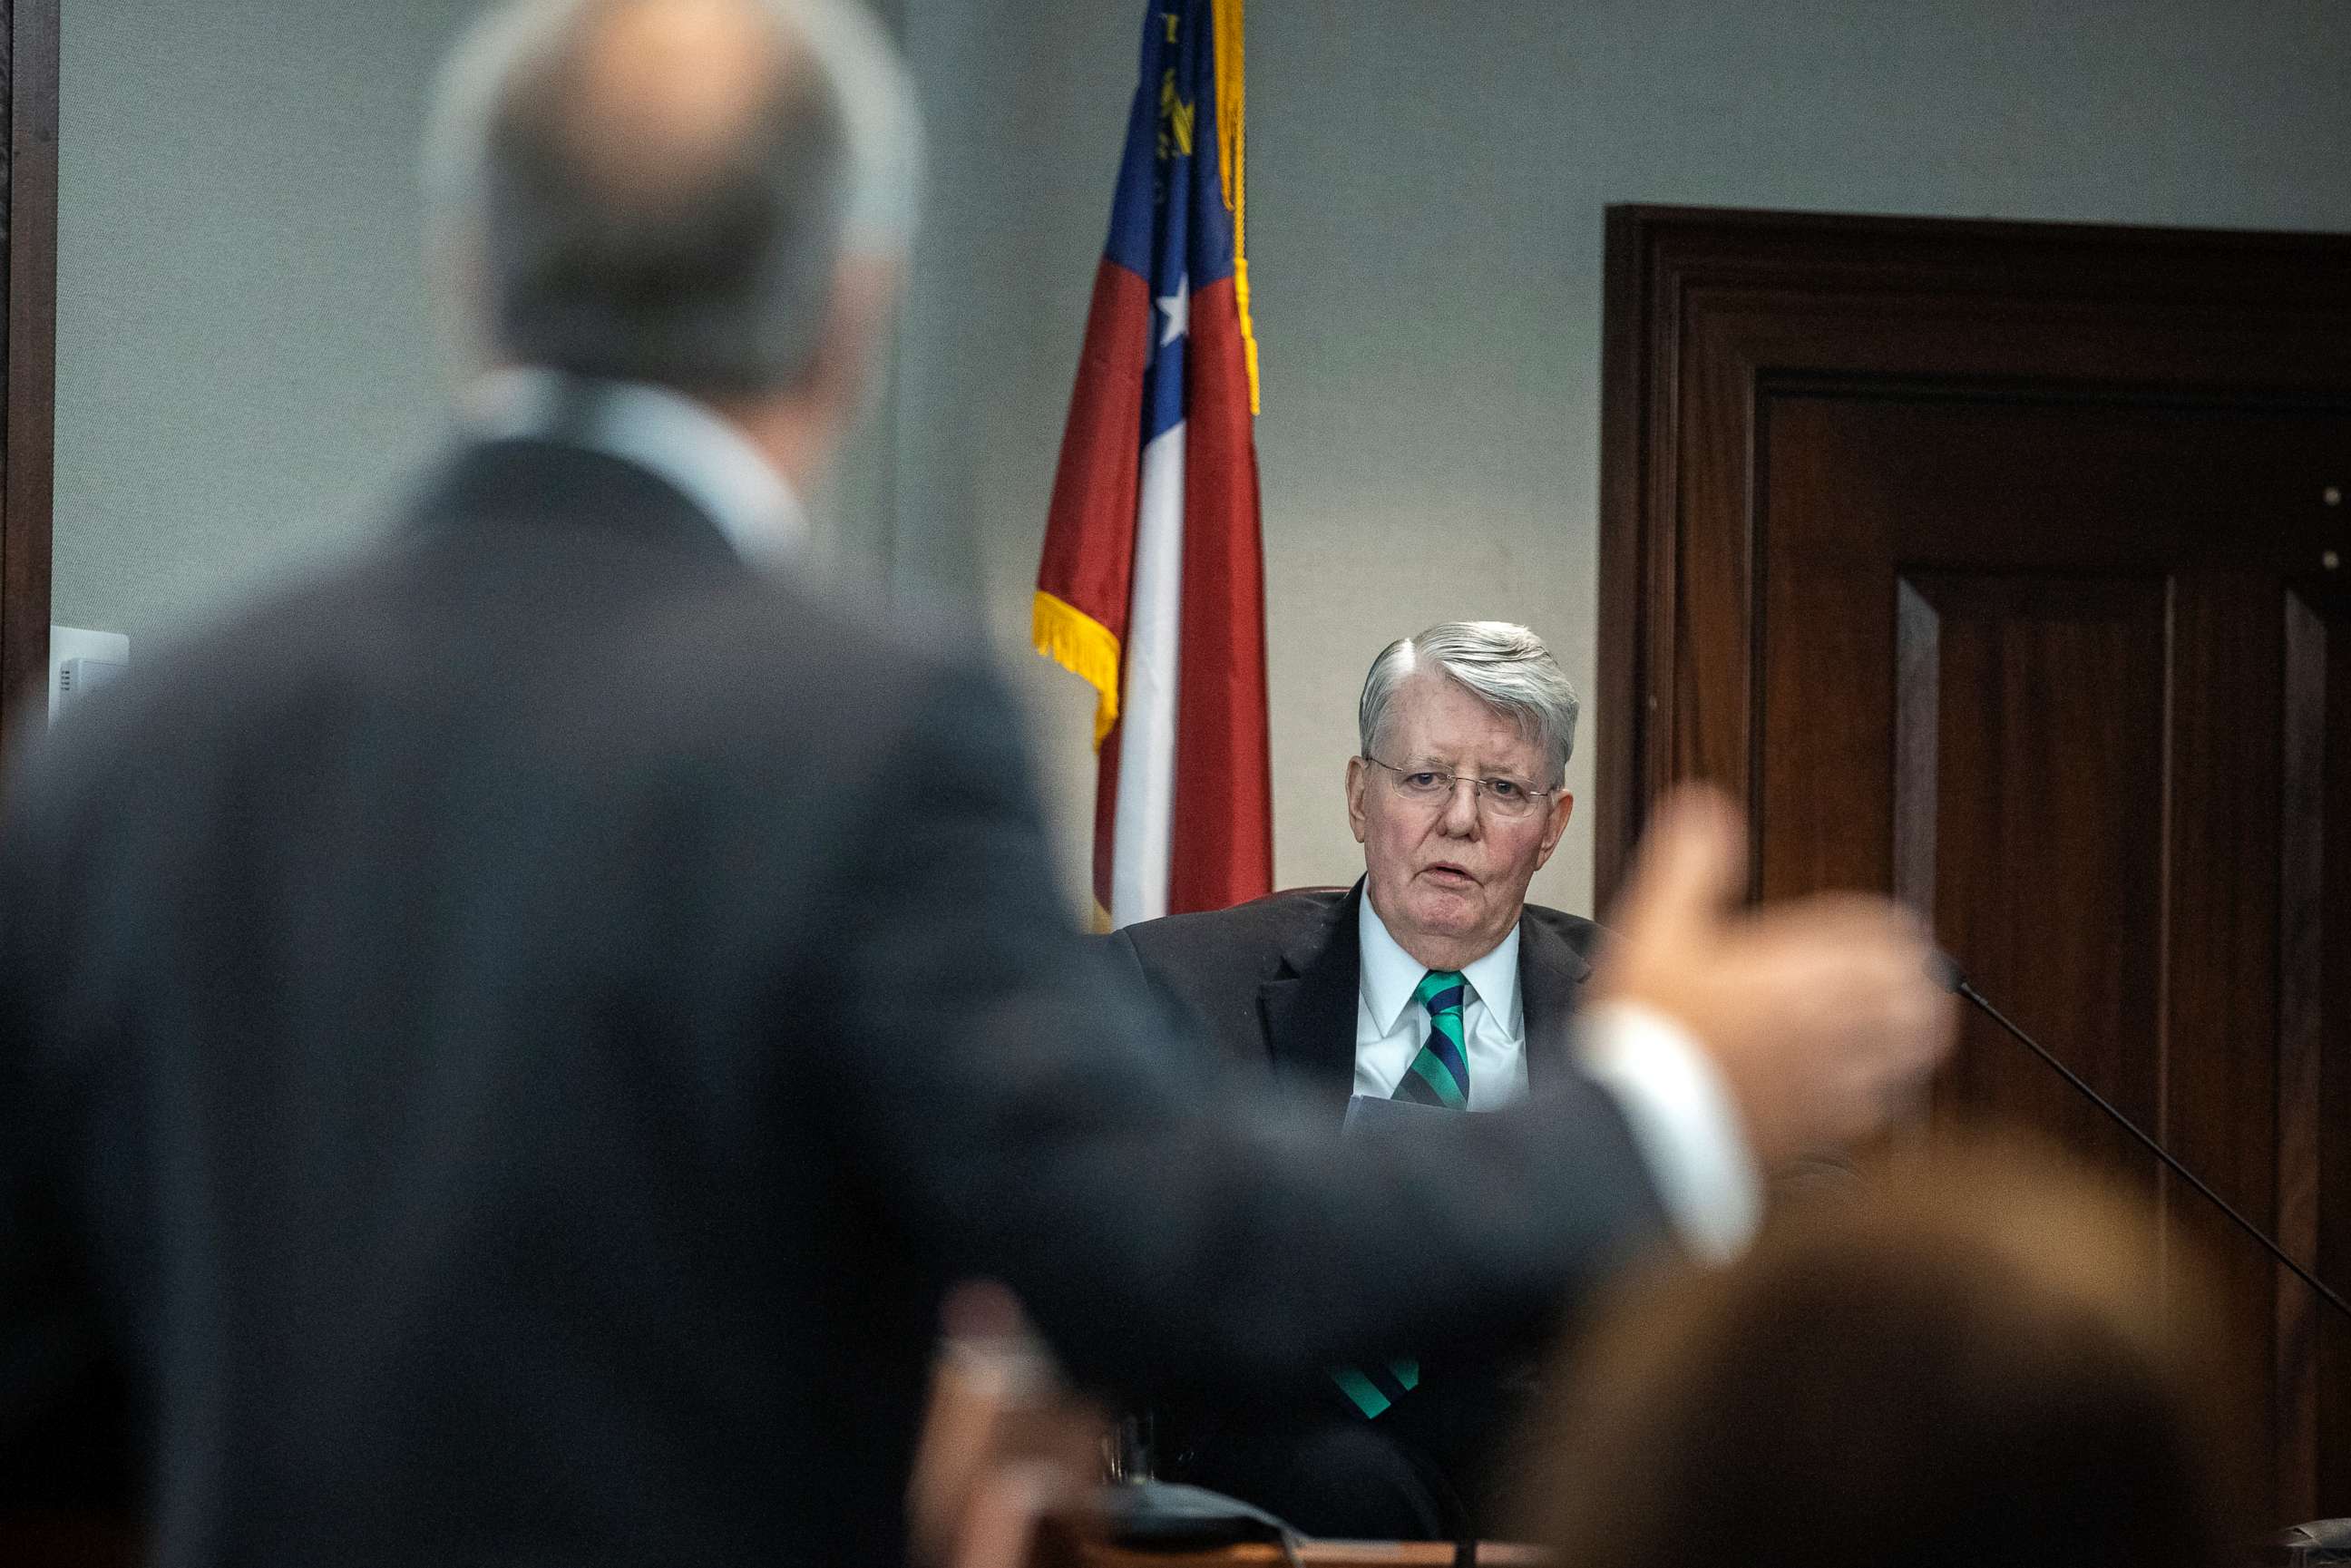 PHOTO: Georgia Bureau of Investigation Forensic Pathology Specialist Dr. Edmund R. Donoghue, right, is cross examined by defense attorney Bob Rubin at the Glynn County Courthouse, Nov. 16, 2021, in Brunswick, Georgia.